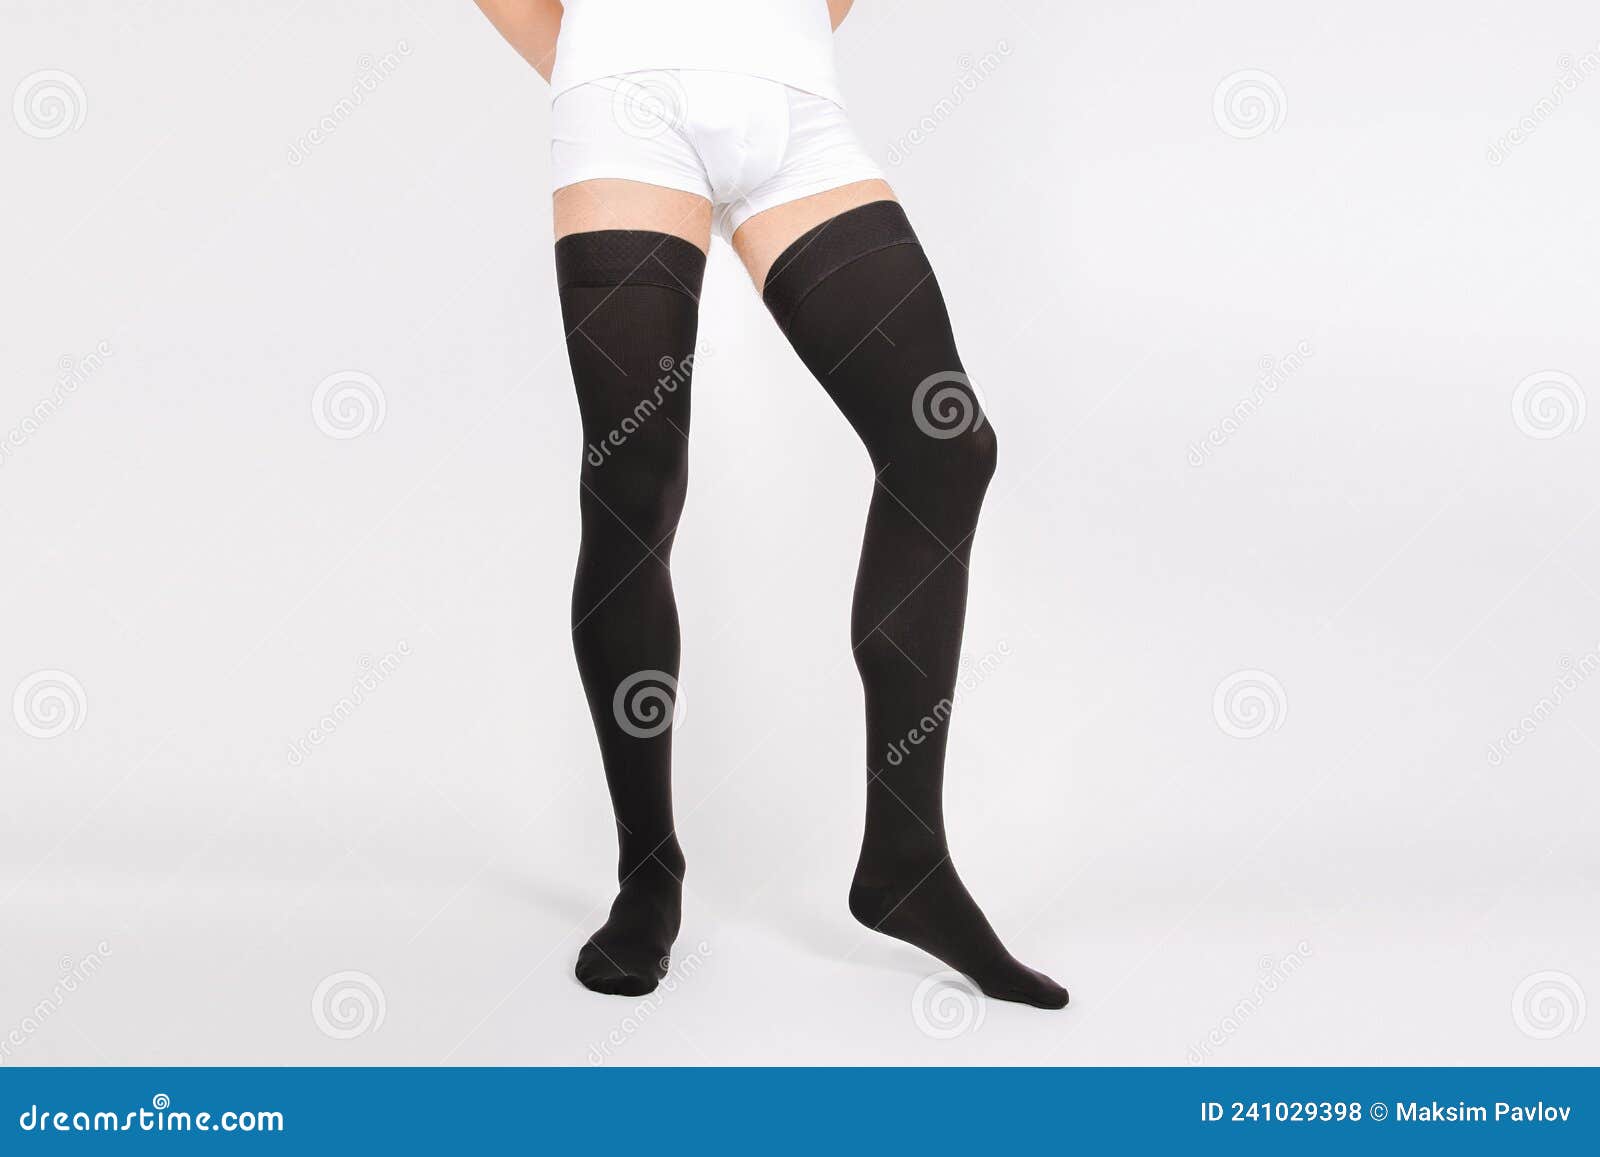 Compression Hosiery. Medical Compression Stockings and Tights for Varicose  Veins and Venouse Therapy Stock Photo - Image of health, anatomy: 241029398